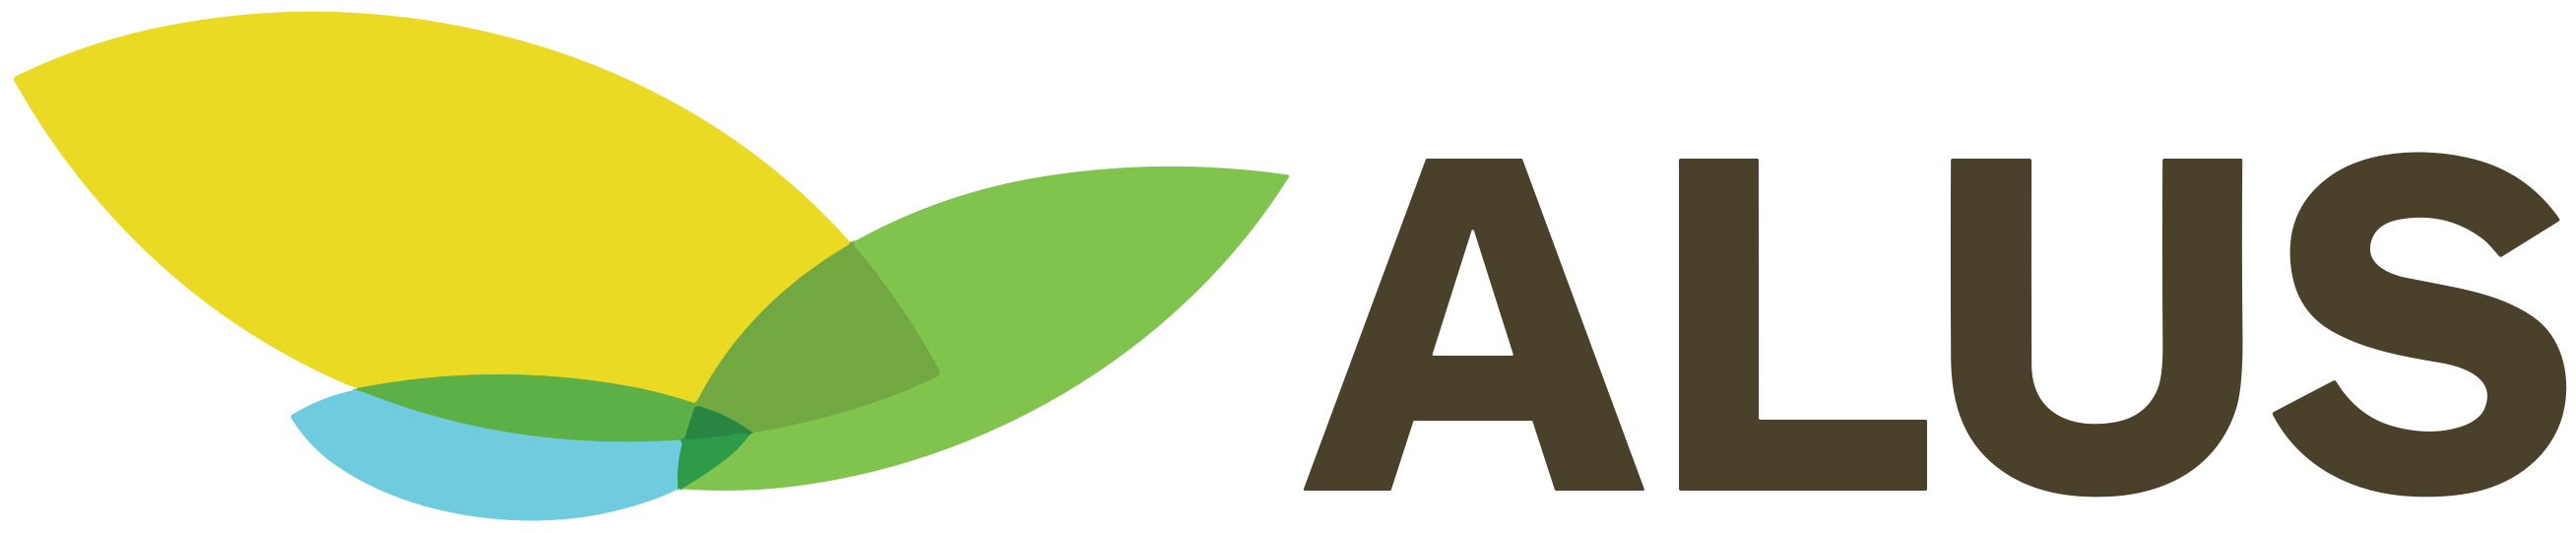 Logo for Alternative Land Use Services (ALUS) on a transparent background